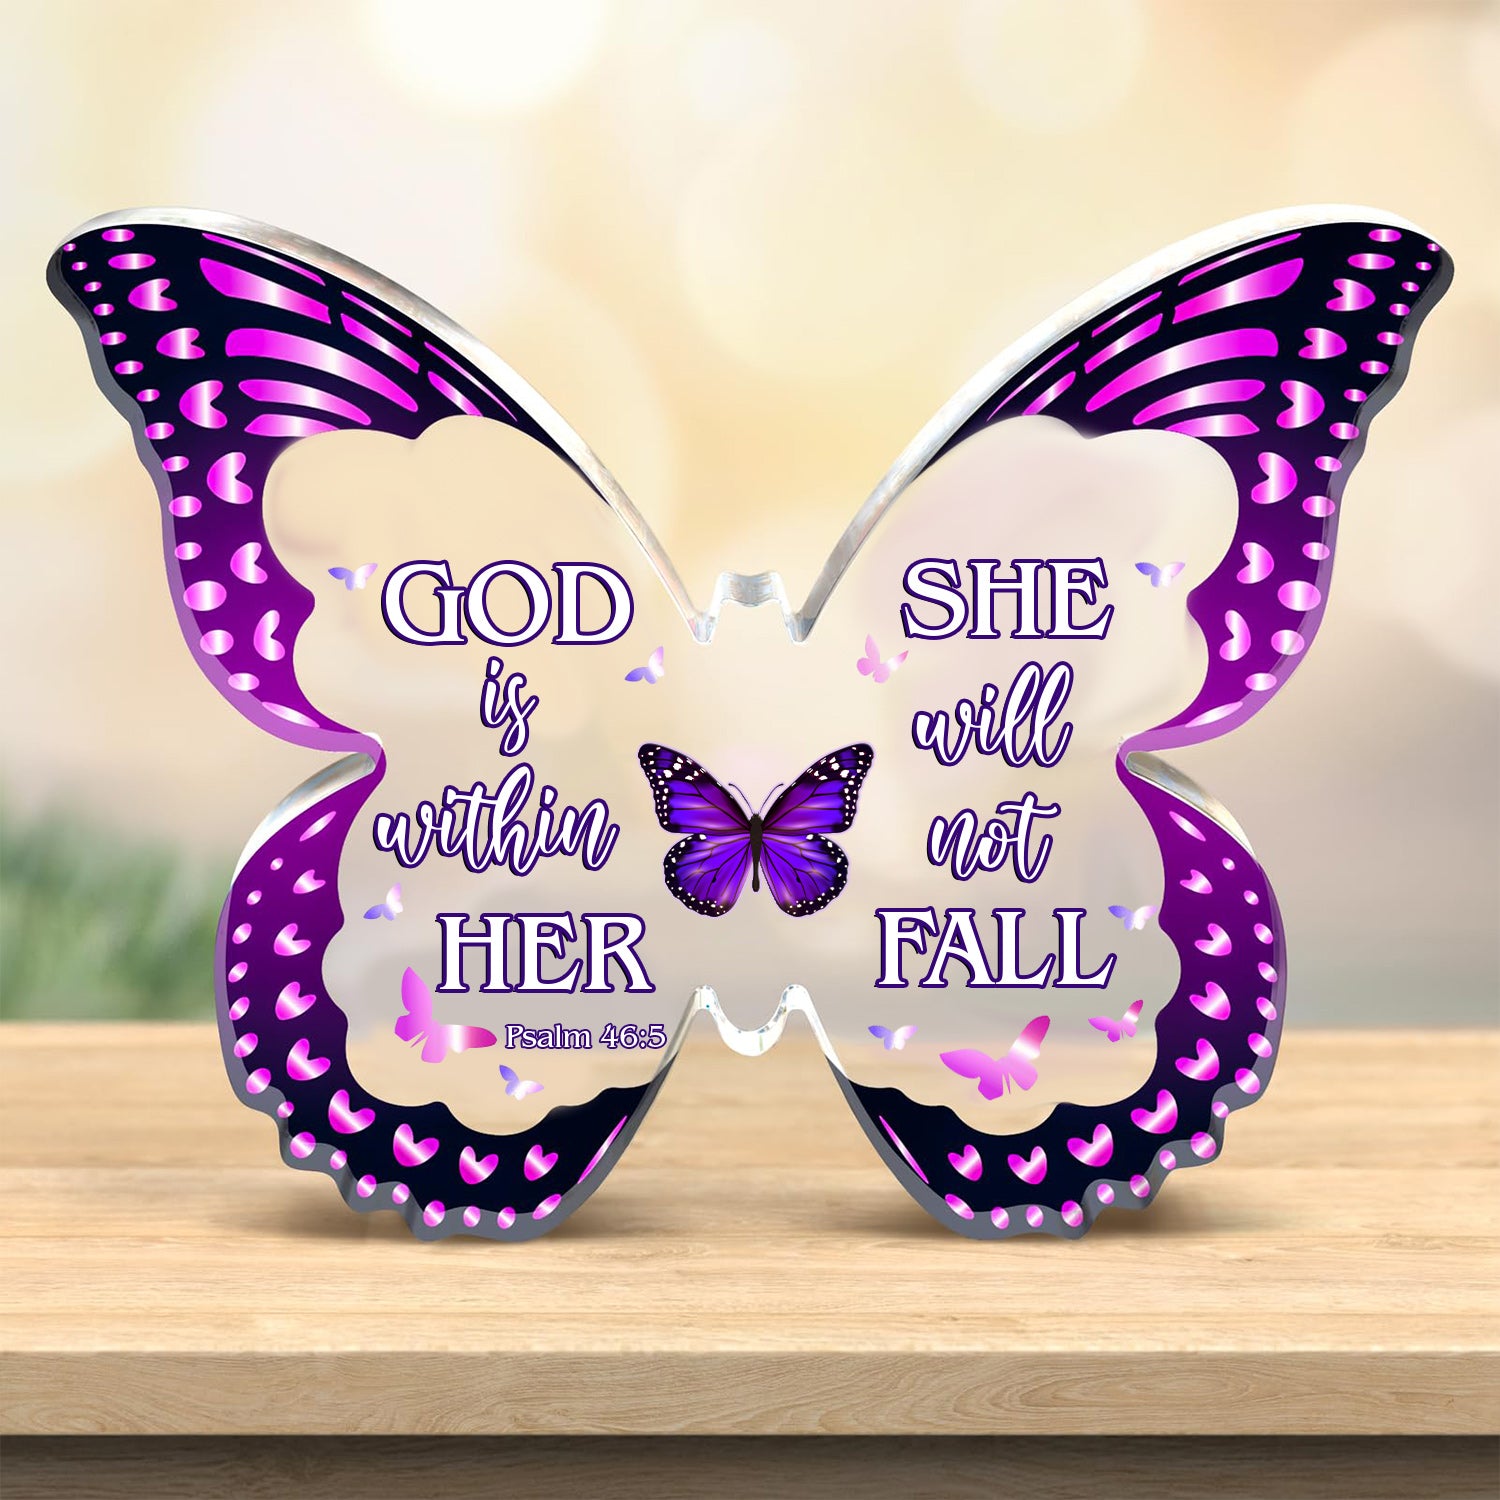 God Is Within Her She Is Not Fall Christian Gift Inspirational Religious Gift Acrylic Plaque